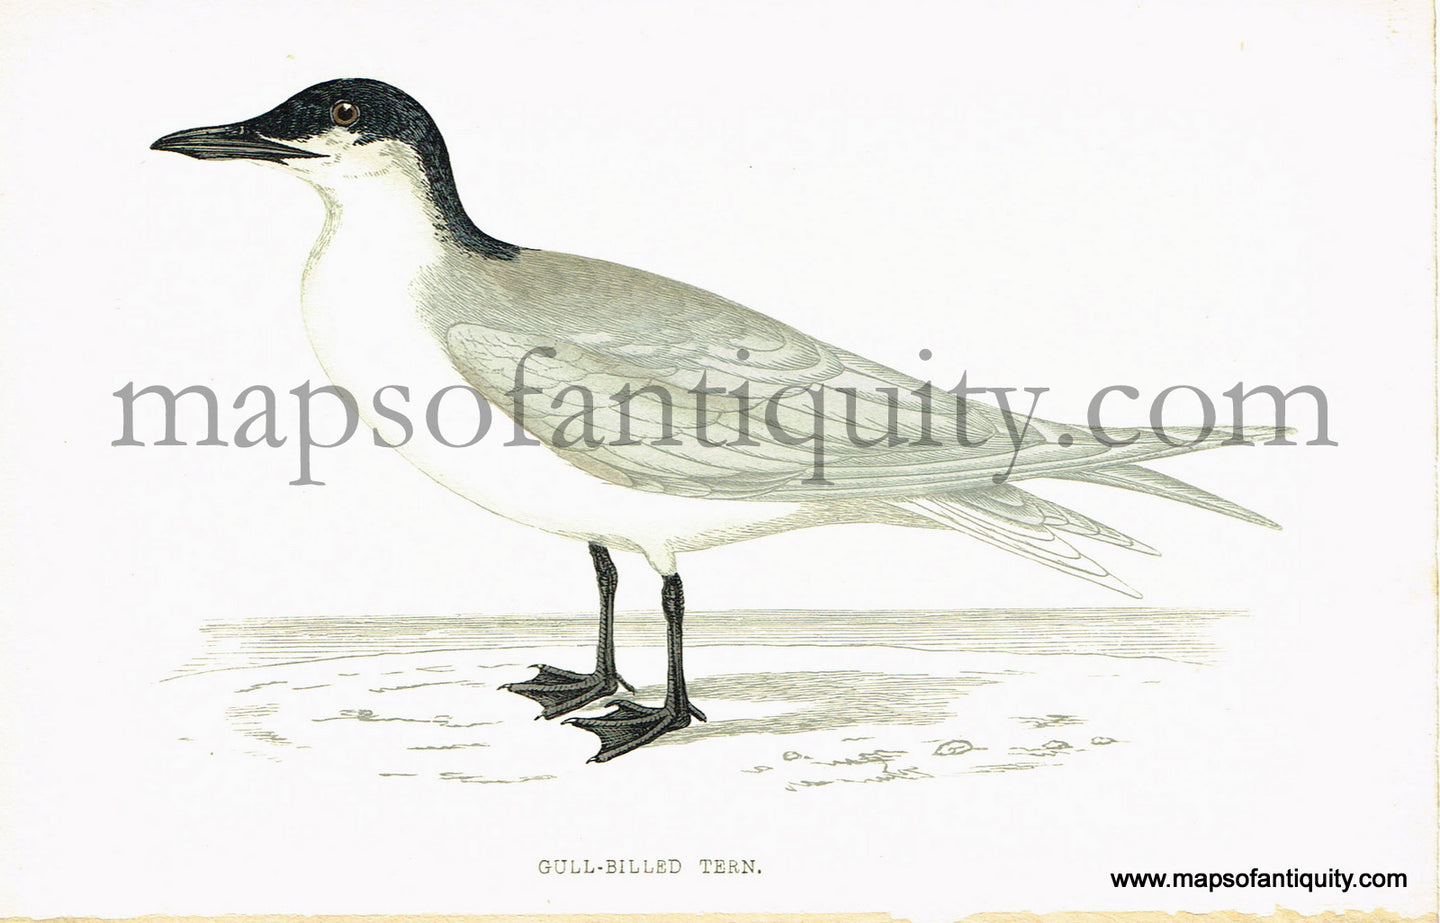 Antique-Hand-Colored-Engraved-Illustration-Gull-billed-Tern-Antique-Prints-Natural-History-Birds-1867-Morris-Maps-Of-Antiquity